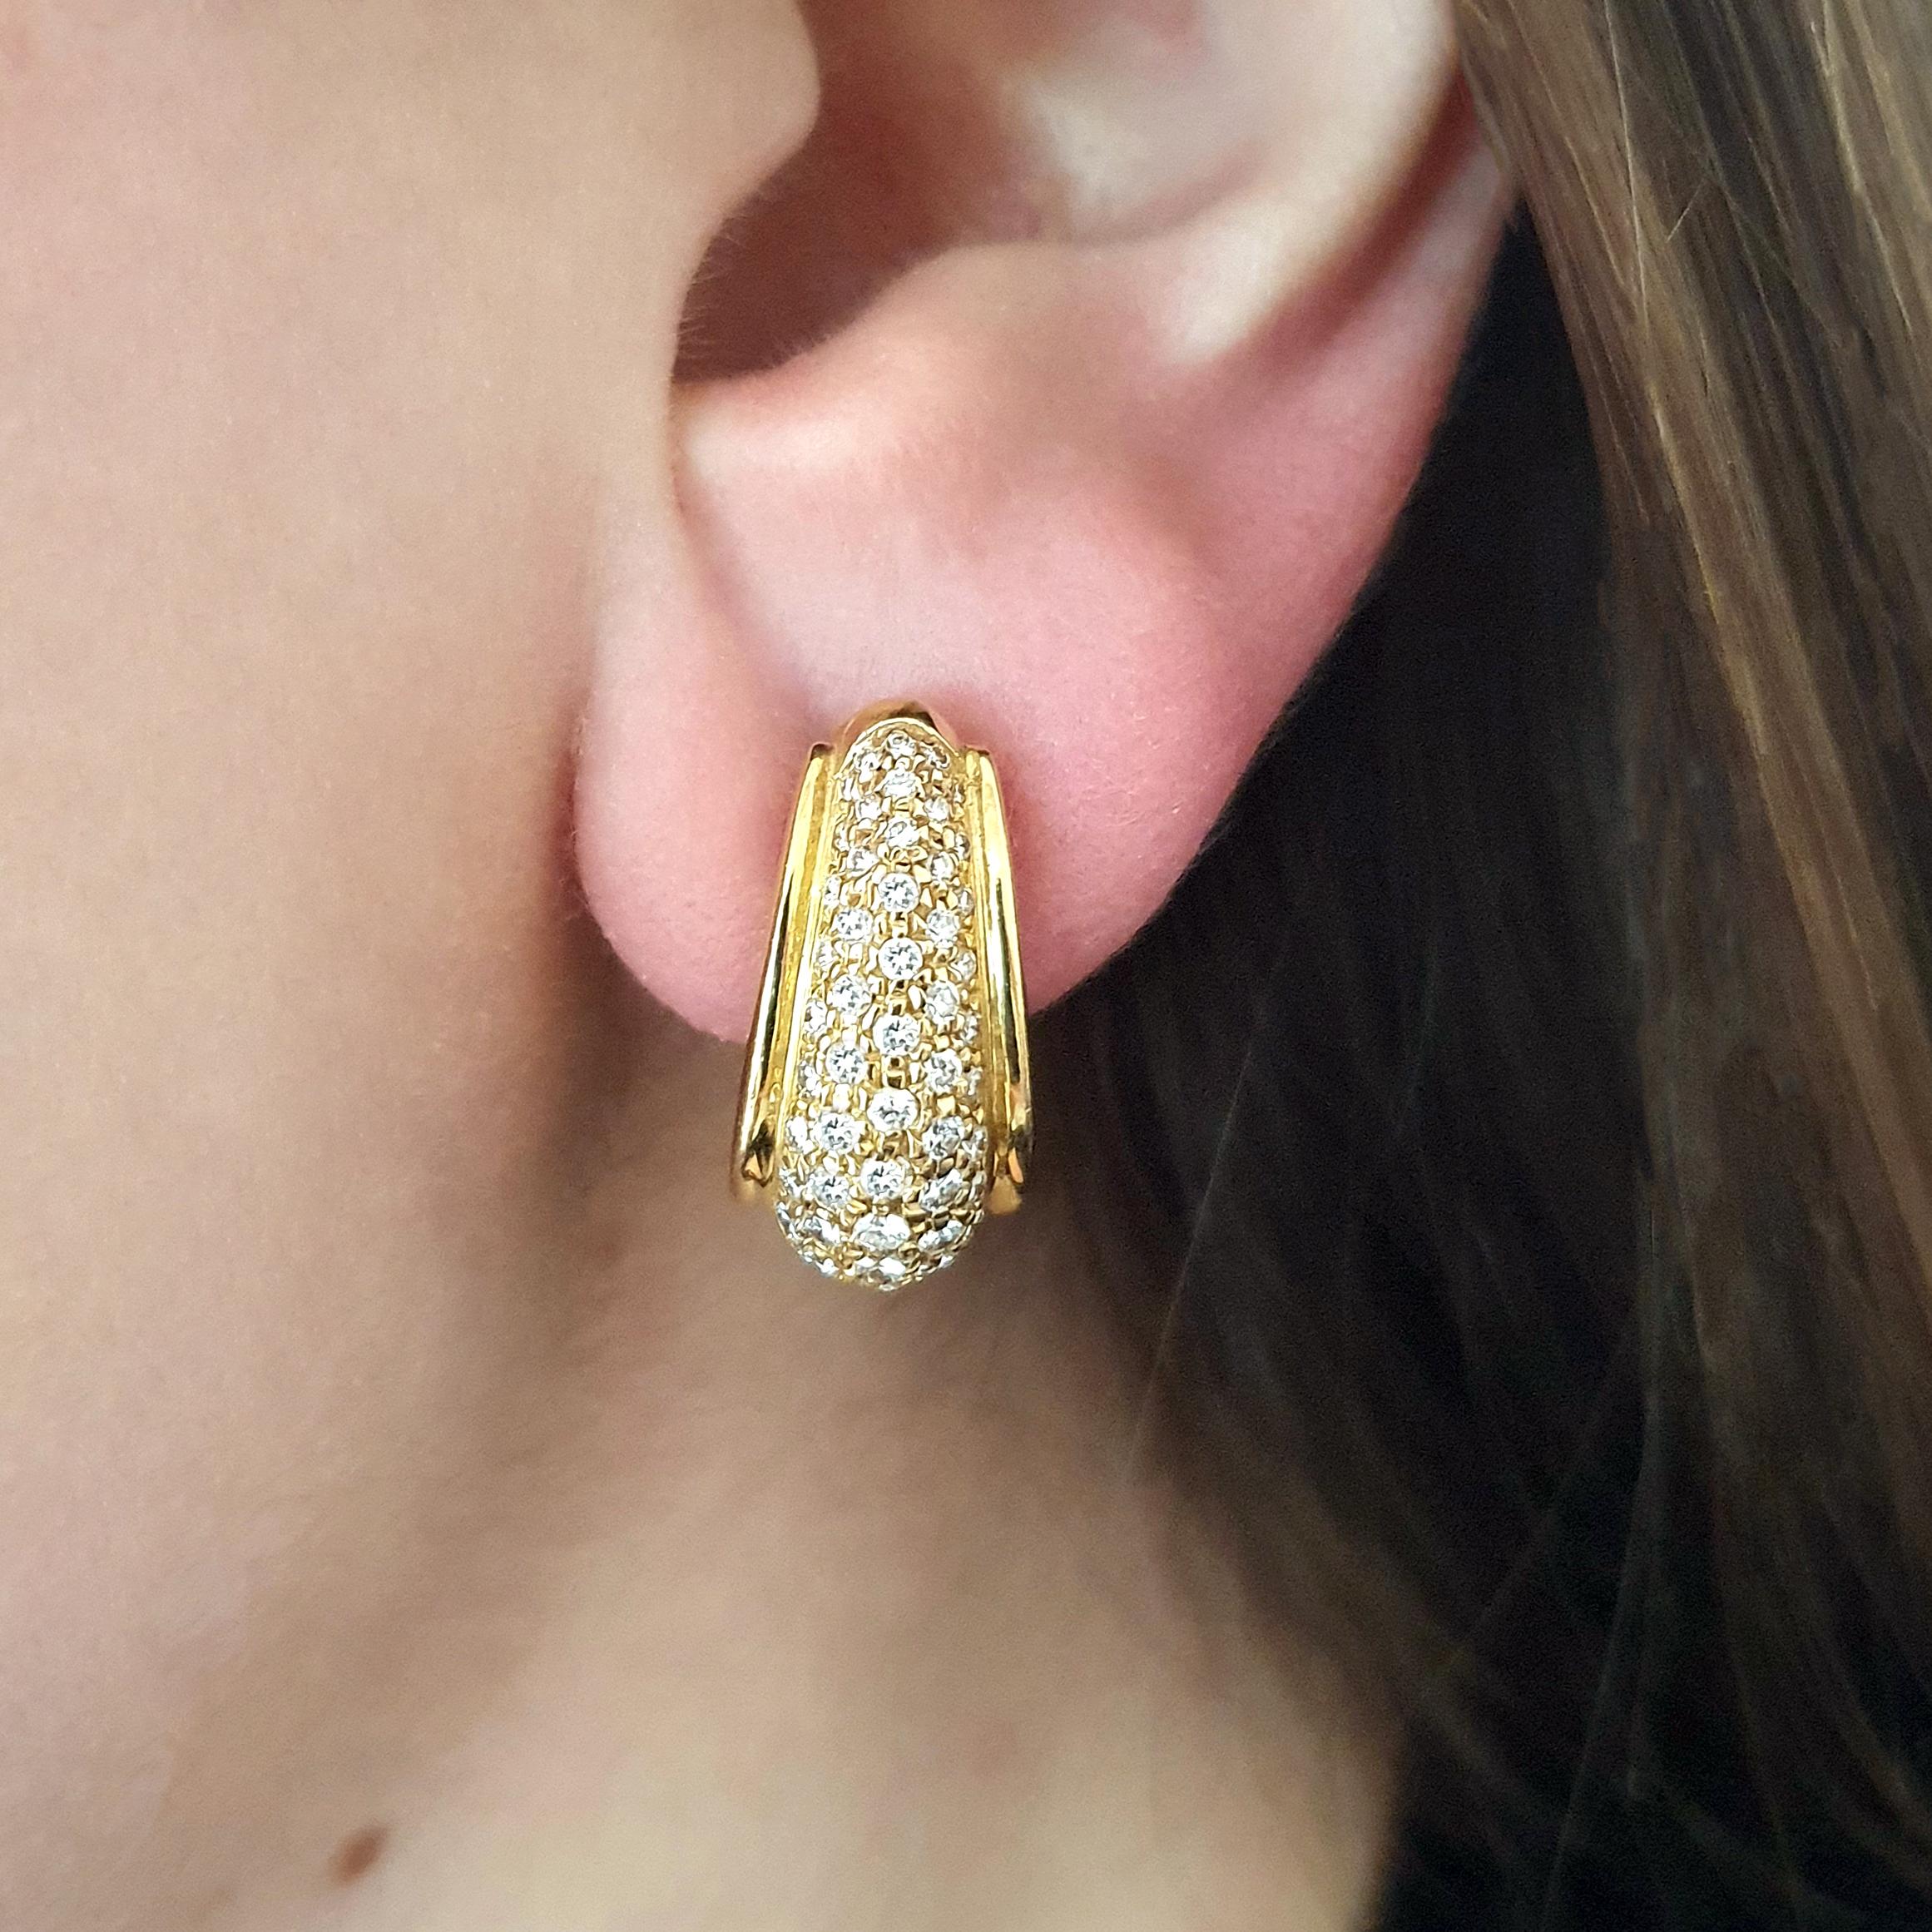 Diamond on Yellow Gold 18k Ear Clips.

Total height: 0.79 inch (2.00 centimeters).
Width at maximum: 0.39 inch (1.00 centimeter).
Total weight: 18.85 grams